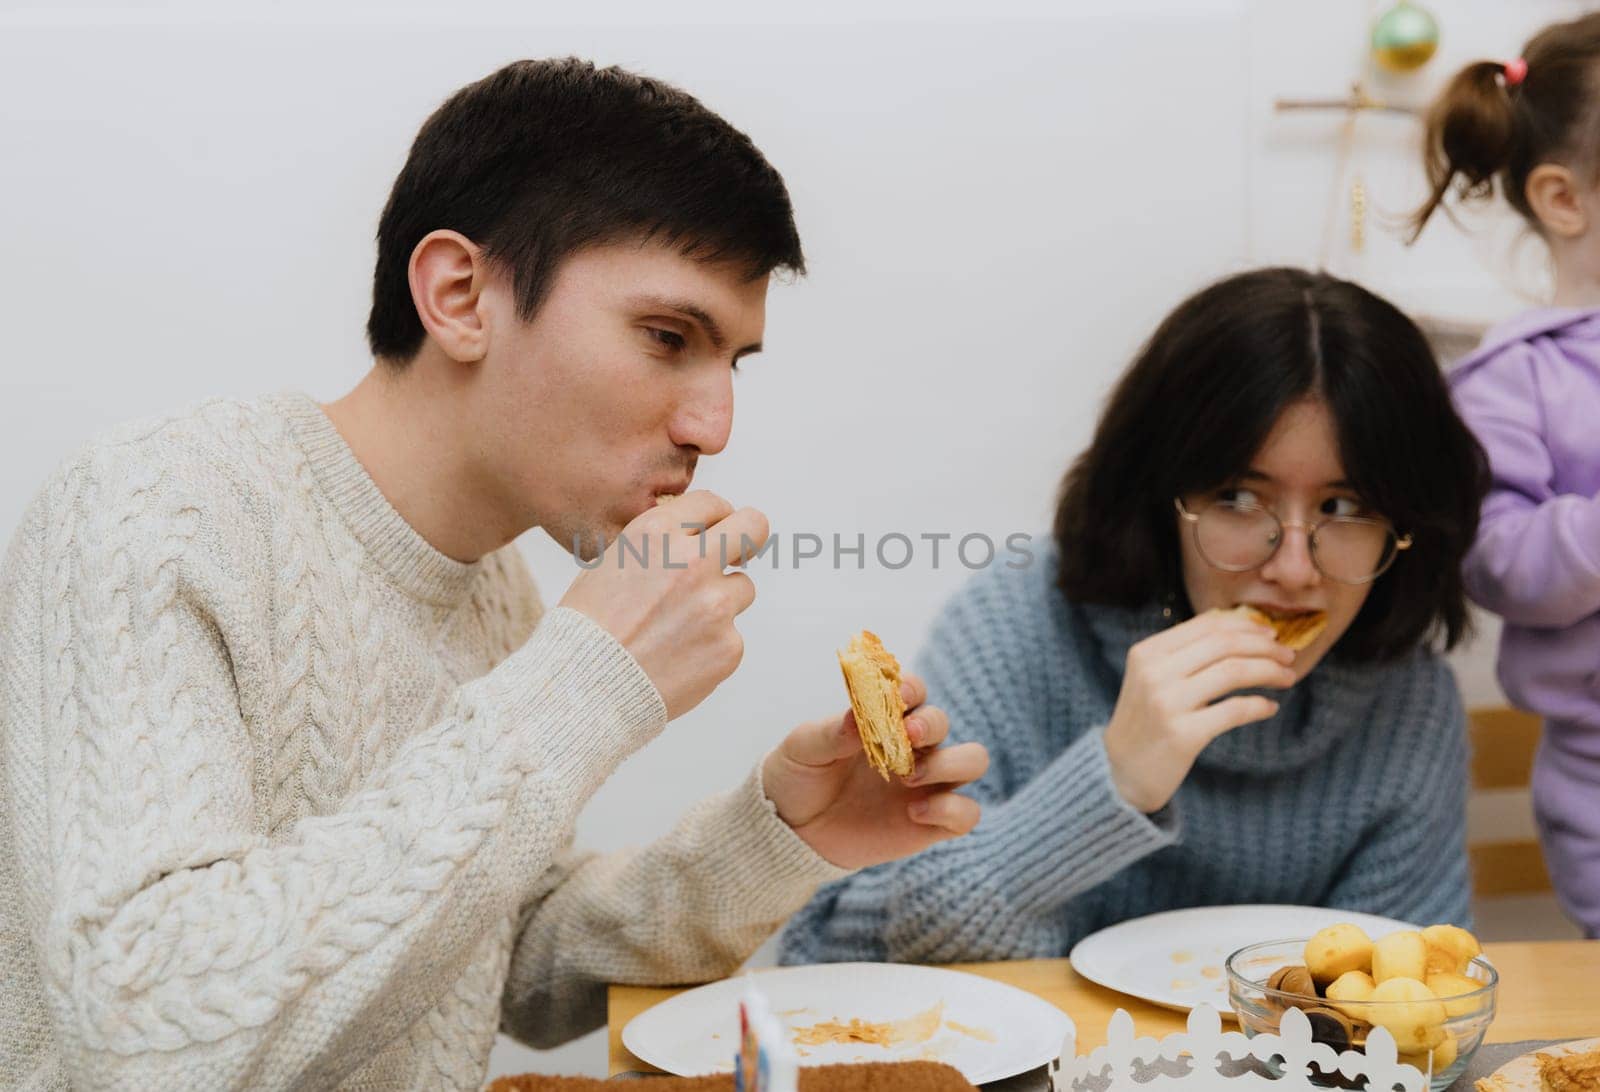 One young handsome Caucasian guy takes a surprise out of his mouth from an eaten piece of royal galette, sitting at the table with his family, close-up side view.